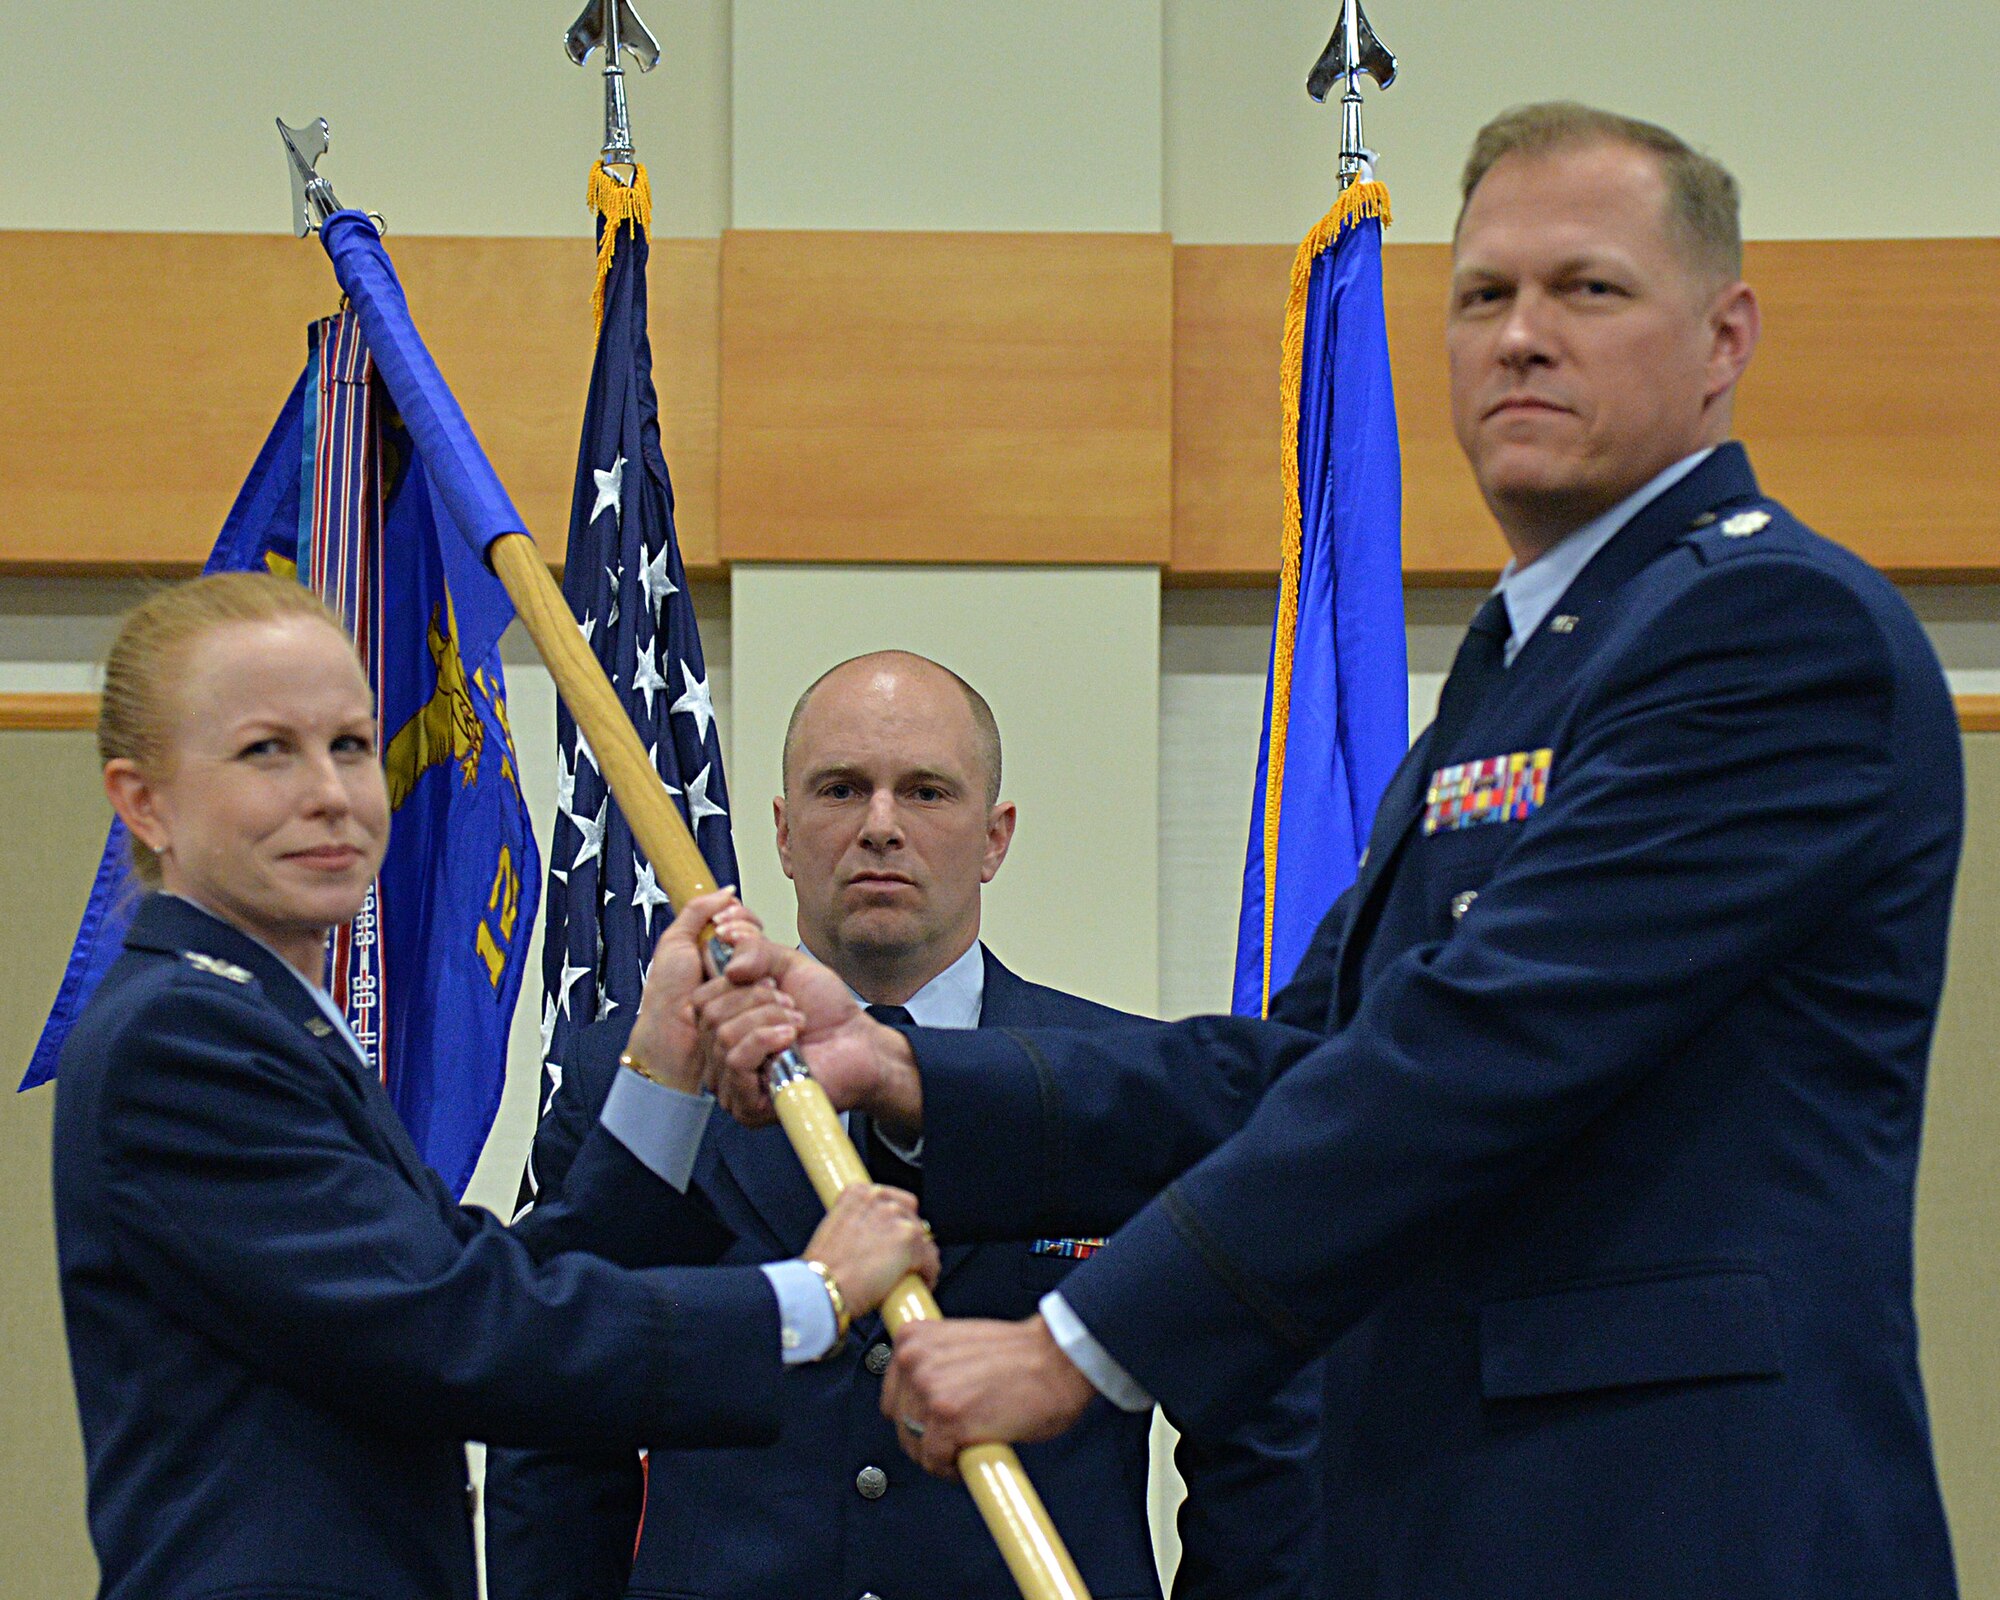 Lt. Col. Stephen Meister, right, accepts command of the 12th Missile Squadron from Col. Anita Feugate Opperman, 341st Operations Group commander during a change of command ceremony July 2, 2018, at the Grizzly Bend on Malmstrom AFB, Mont.